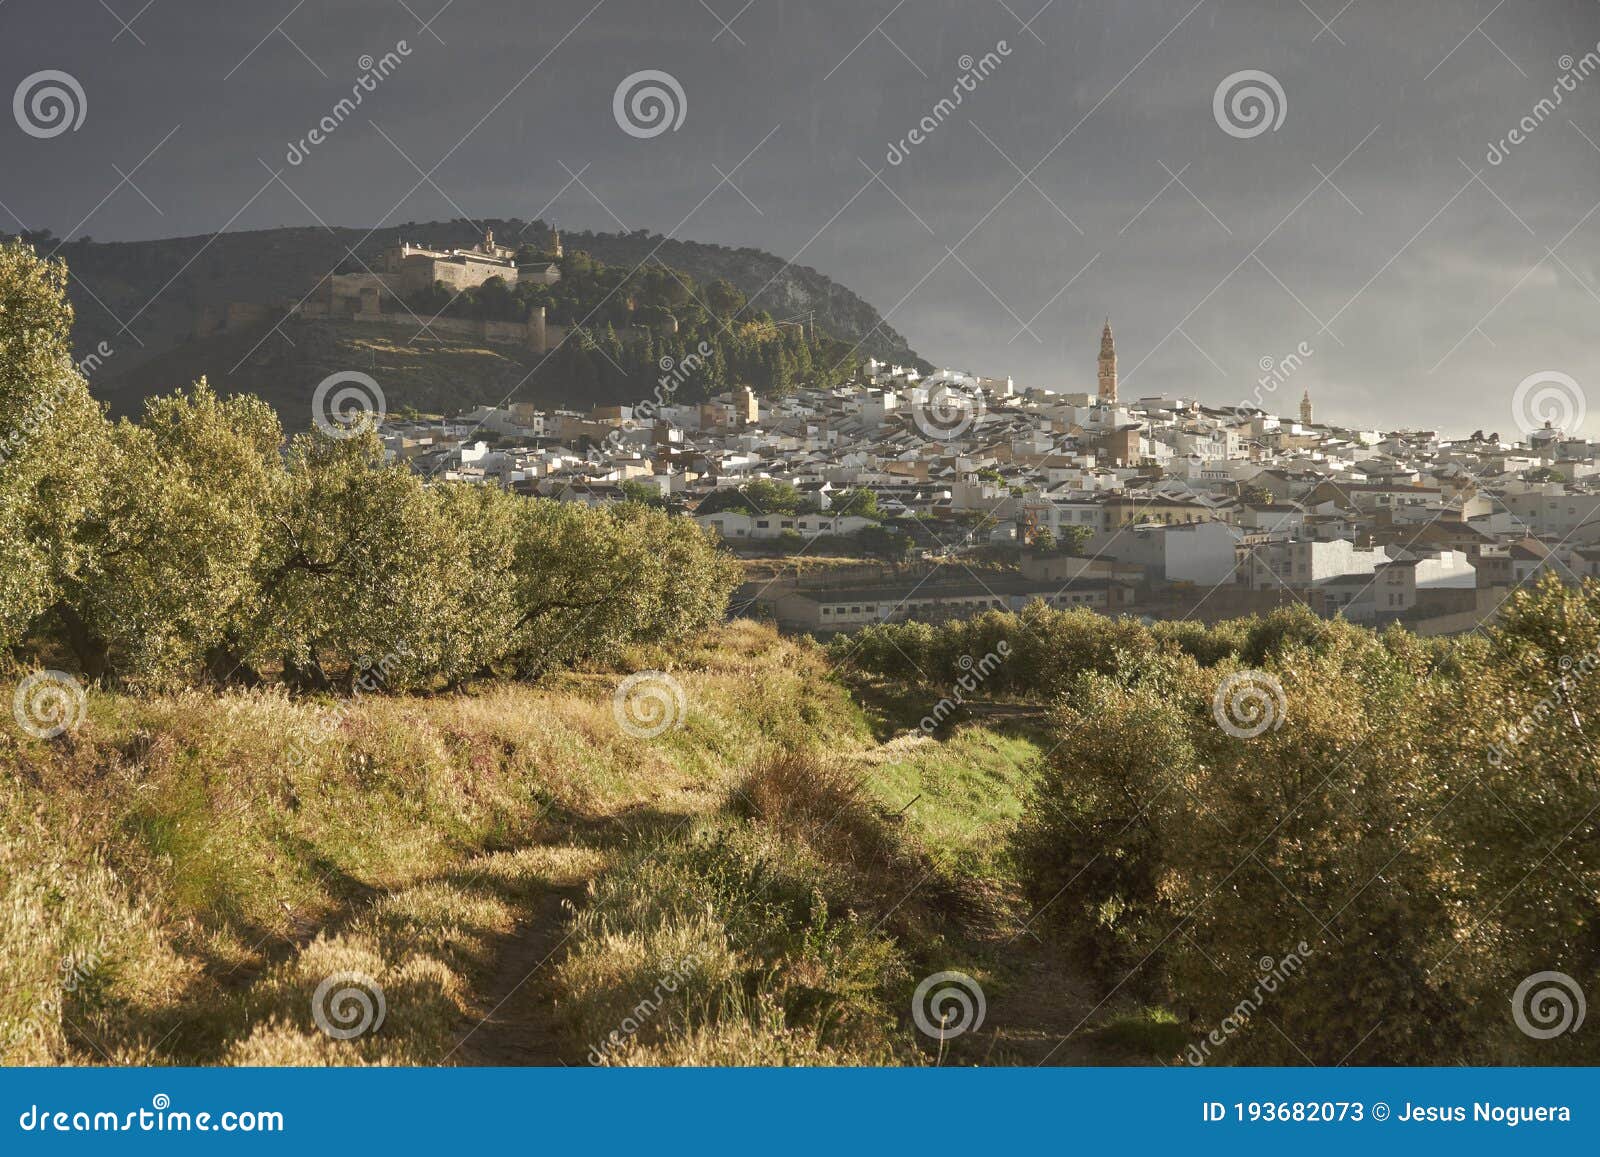 views from an olive grove of the city of estepa. spain